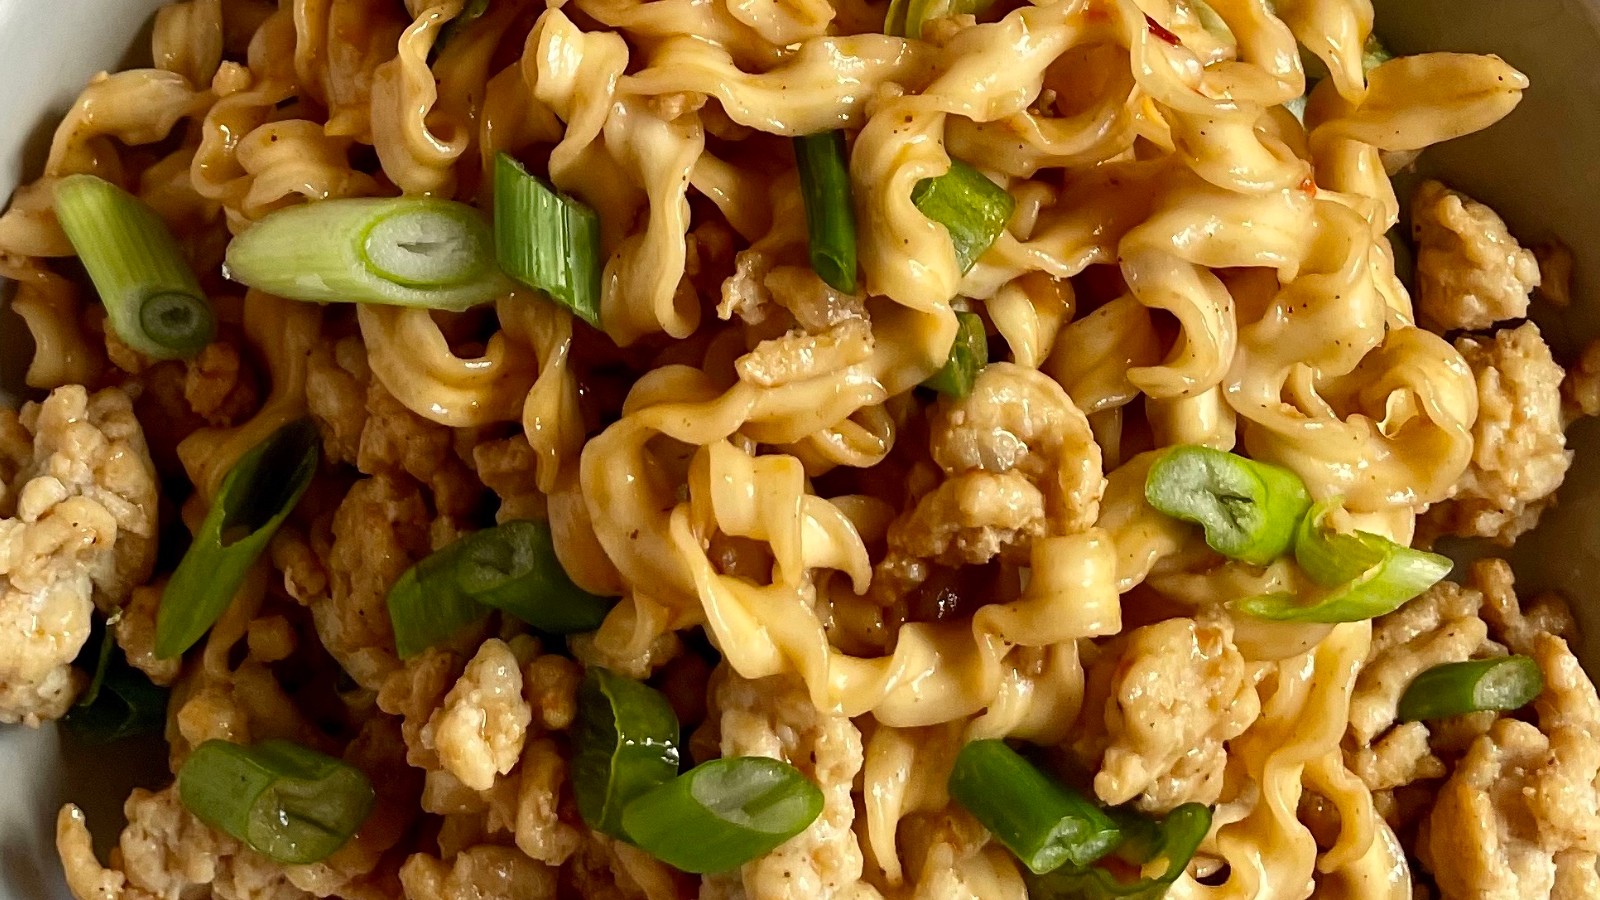 Image of Ground Chicken Squiggly Noodles